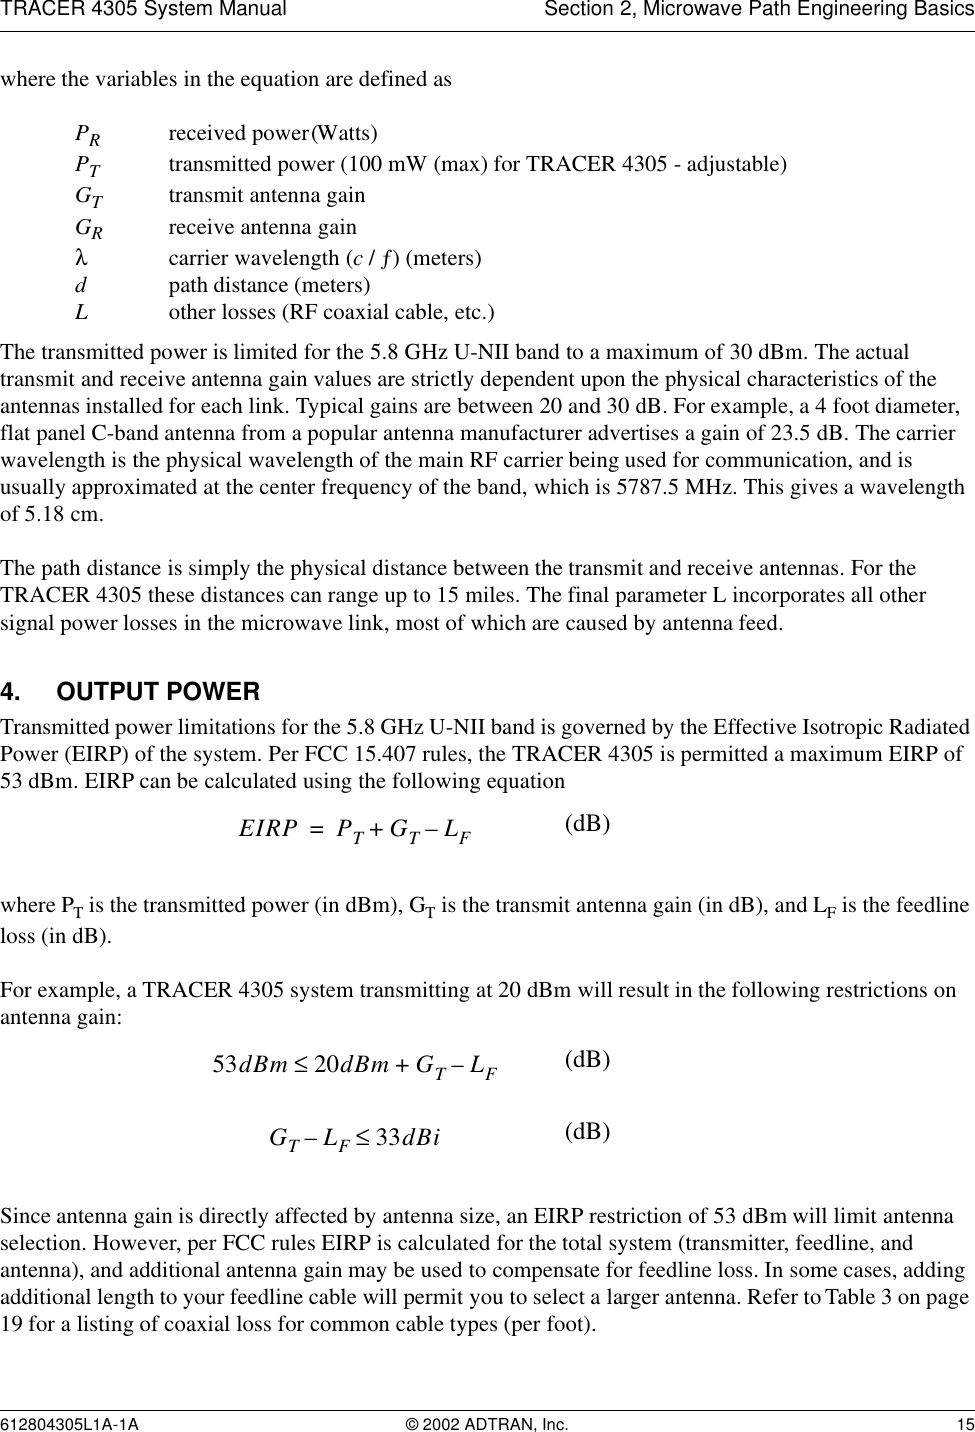 TRACER 4305 System Manual Section 2, Microwave Path Engineering Basics612804305L1A-1A © 2002 ADTRAN, Inc. 15where the variables in the equation are defined asPRreceived power (Watts)PTtransmitted power (100 mW (max) for TRACER 4305 - adjustable)GTtransmit antenna gainGRreceive antenna gainλcarrier wavelength (c / ƒ) (meters)dpath distance (meters)Lother losses (RF coaxial cable, etc.)The transmitted power is limited for the 5.8 GHz U-NII band to a maximum of 30 dBm. The actual transmit and receive antenna gain values are strictly dependent upon the physical characteristics of the antennas installed for each link. Typical gains are between 20 and 30 dB. For example, a 4 foot diameter, flat panel C-band antenna from a popular antenna manufacturer advertises a gain of 23.5 dB. The carrier wavelength is the physical wavelength of the main RF carrier being used for communication, and is usually approximated at the center frequency of the band, which is 5787.5 MHz. This gives a wavelength of 5.18 cm.The path distance is simply the physical distance between the transmit and receive antennas. For the TRACER 4305 these distances can range up to 15 miles. The final parameter L incorporates all other signal power losses in the microwave link, most of which are caused by antenna feed.4. OUTPUT POWERTransmitted power limitations for the 5.8 GHz U-NII band is governed by the Effective Isotropic Radiated Power (EIRP) of the system. Per FCC 15.407 rules, the TRACER 4305 is permitted a maximum EIRP of 53 dBm. EIRP can be calculated using the following equationwhere PT is the transmitted power (in dBm), GT is the transmit antenna gain (in dB), and LF is the feedline loss (in dB).For example, a TRACER 4305 system transmitting at 20 dBm will result in the following restrictions on antenna gain:Since antenna gain is directly affected by antenna size, an EIRP restriction of 53 dBm will limit antenna selection. However, per FCC rules EIRP is calculated for the total system (transmitter, feedline, and antenna), and additional antenna gain may be used to compensate for feedline loss. In some cases, adding additional length to your feedline cable will permit you to select a larger antenna. Refer to Table 3 on page 19 for a listing of coaxial loss for common cable types (per foot).EIRP PTGTLF–+= (dB)53dBm 20dBm GTLF–+≤(dB)GTLF–33dBi≤(dB)